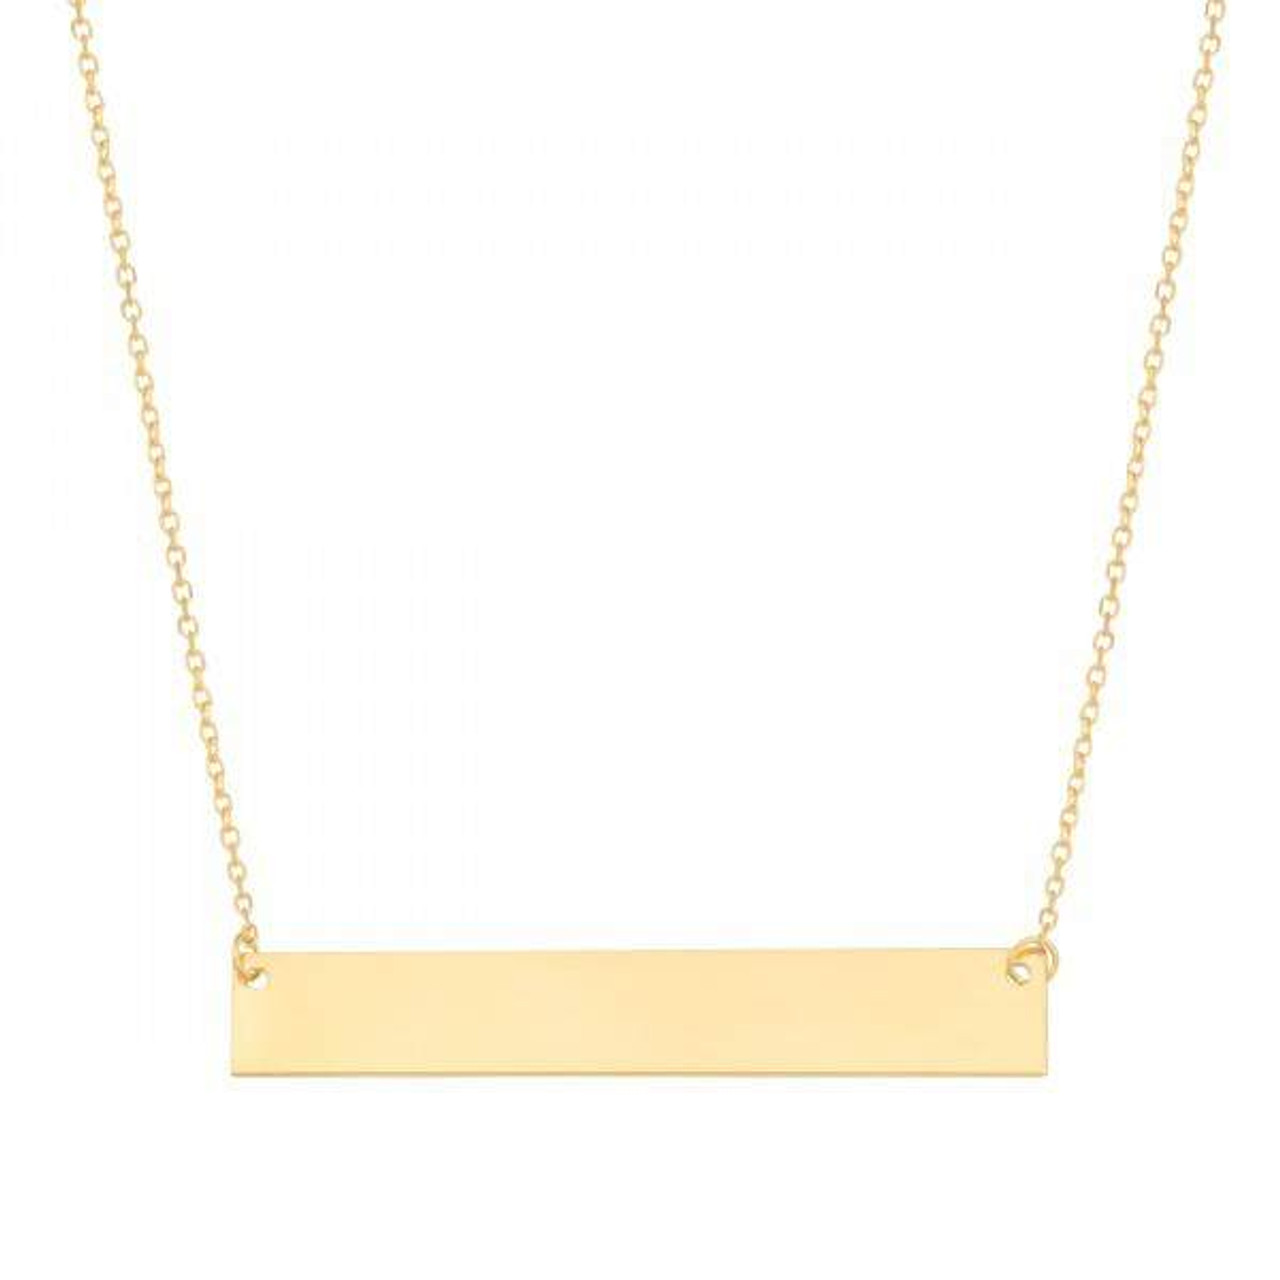 3D Engraved Bar Necklace in Rose Gold Plating | Your Jewellery Shop NZ